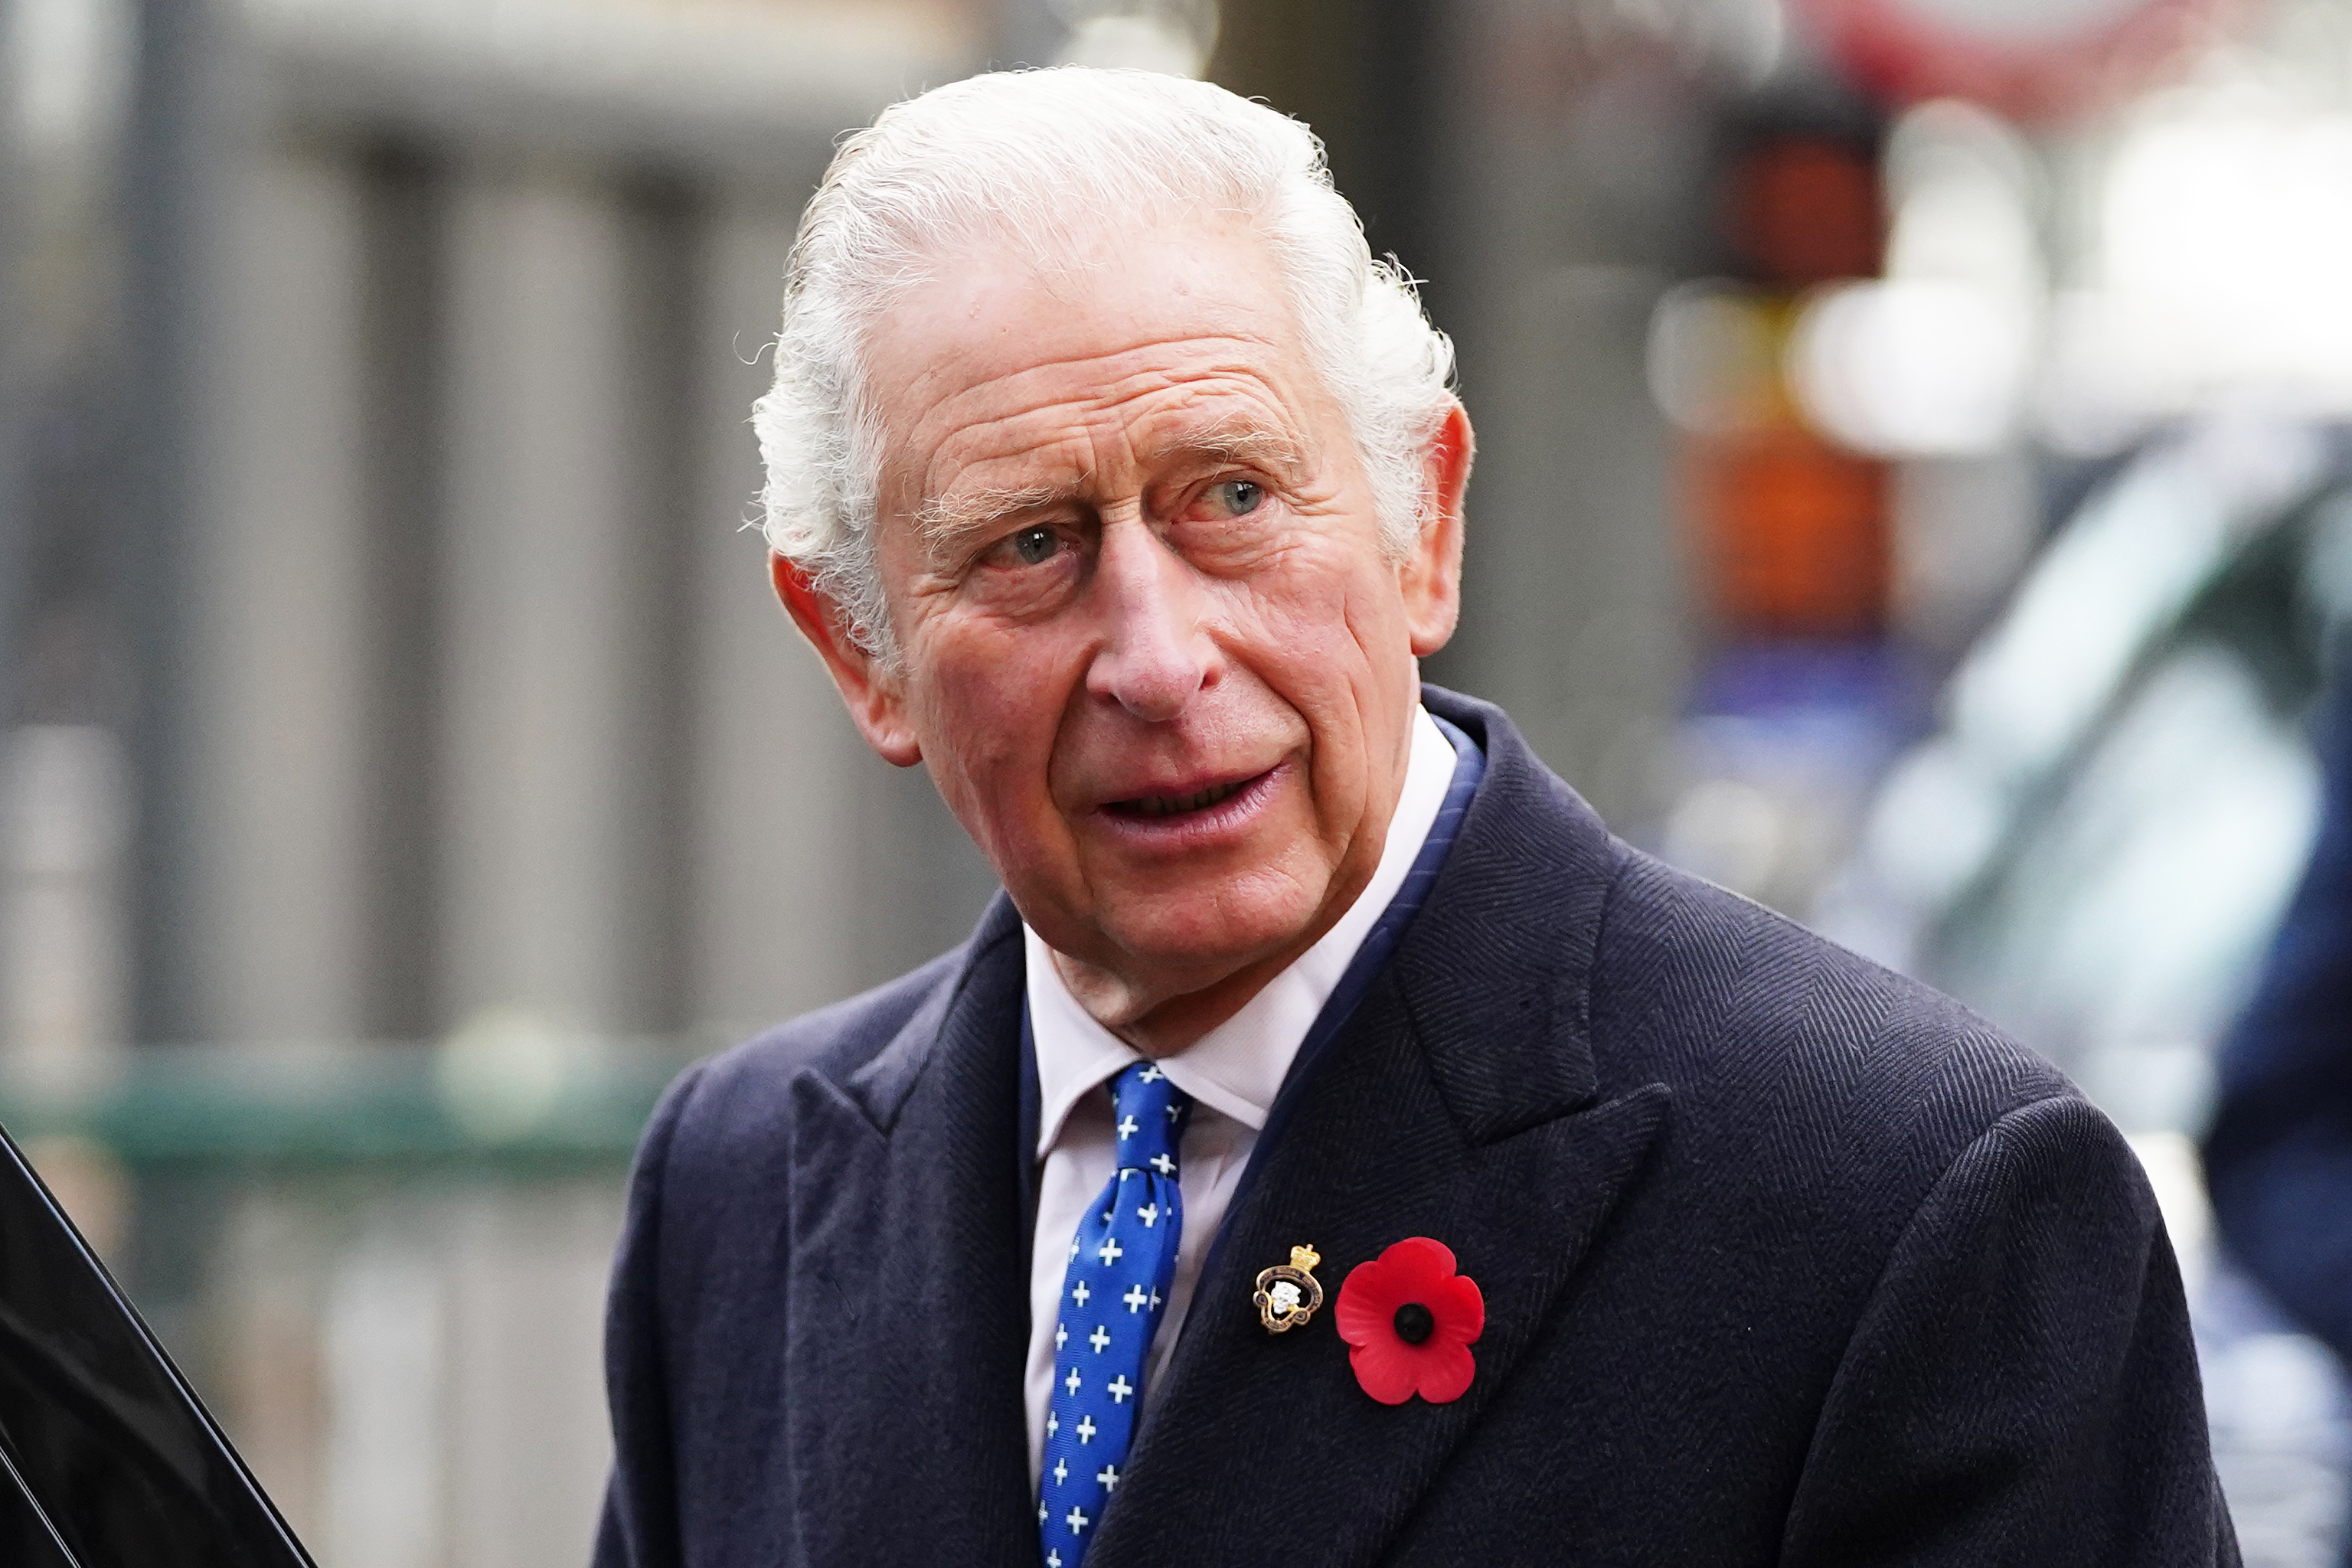 King Charles III, then Prince Charles, Prince of Wales, visiting Glasgow Central Station as part of Network Rail's "Green Trains @ COP26" event on November 5, 2021 in Glasgow, Scotland | Source: Getty Images